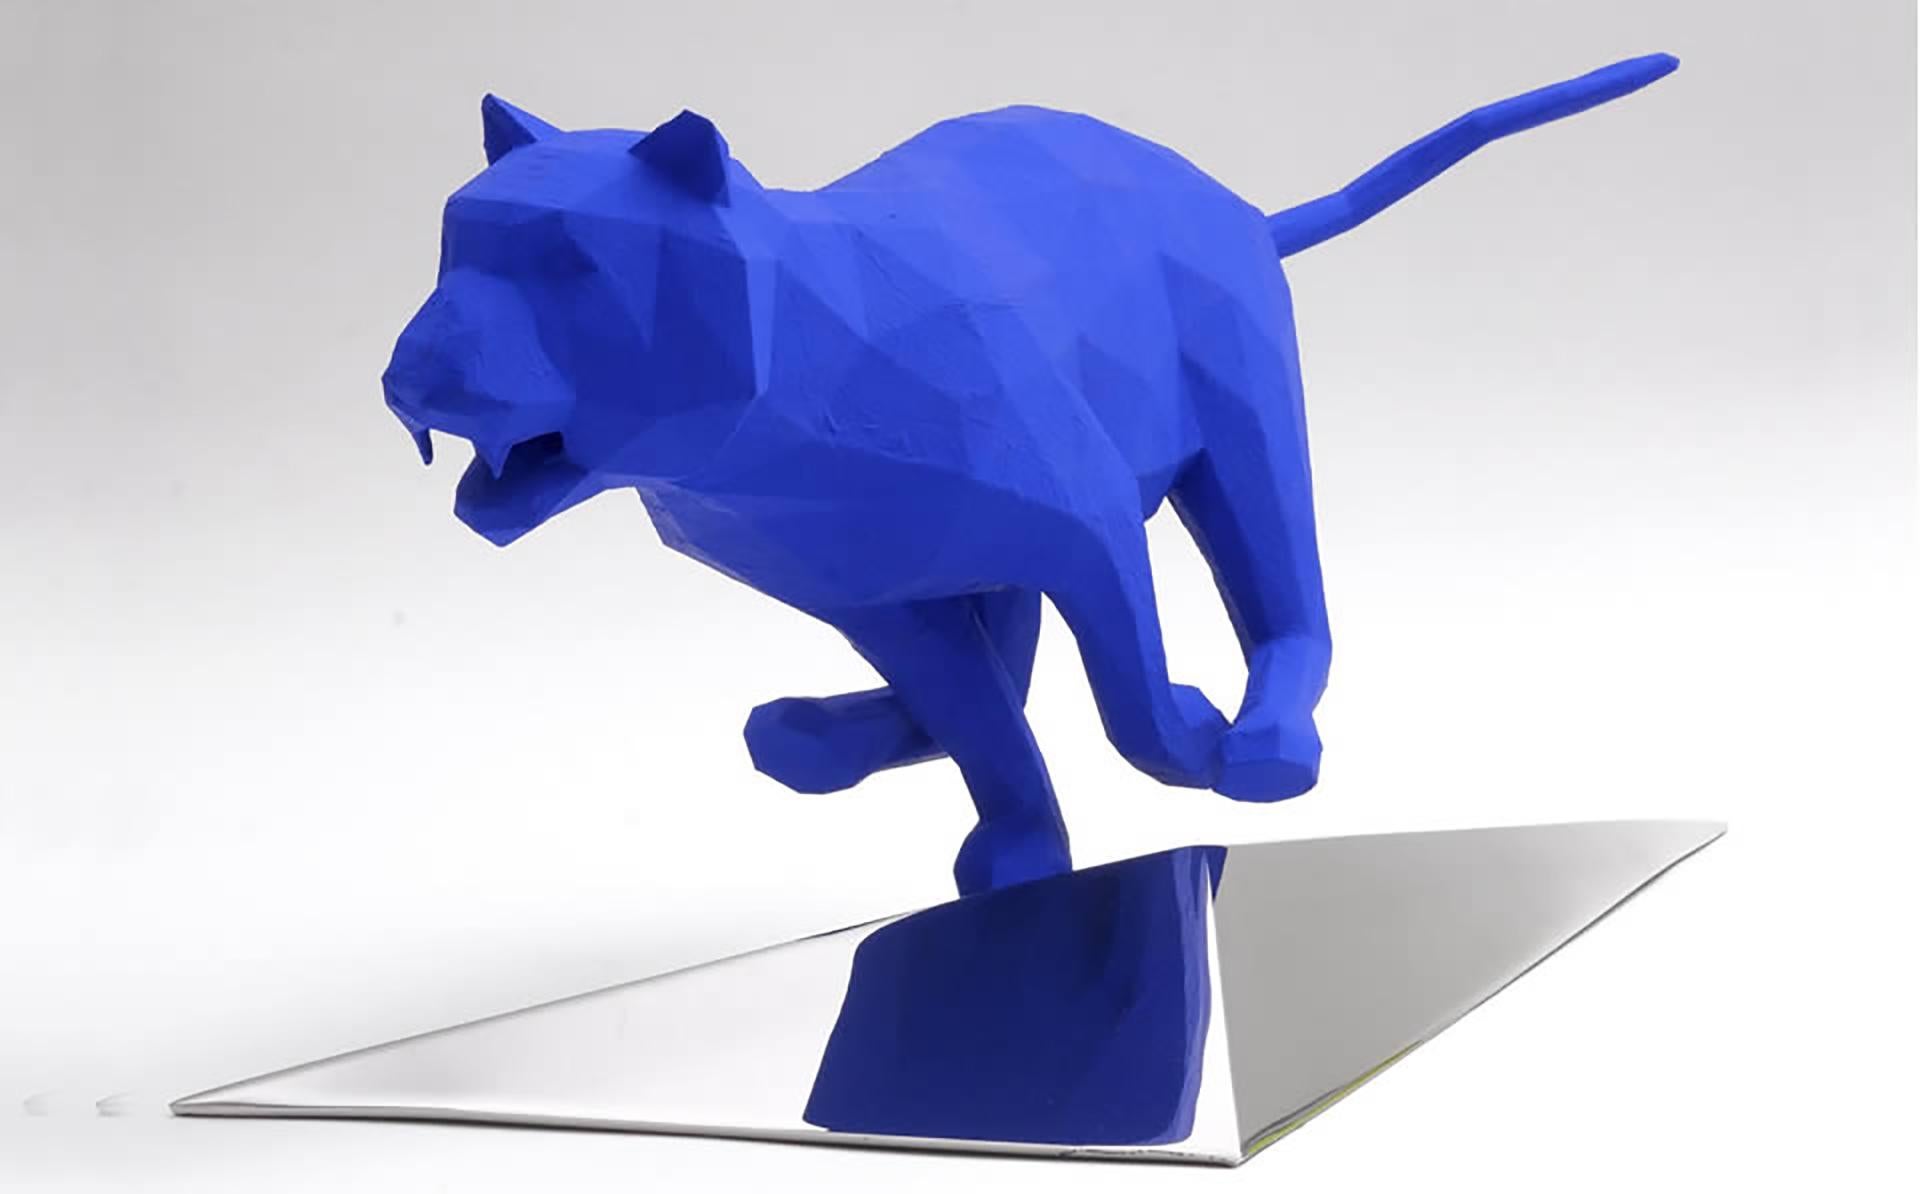 TITLE: ROARR -TANTANTAN
ARTIST: Daniele Basso
YEAR: 2020
MEDIUM TYPE: Sculpture
MEDIUM/MATERIALS: Stainless steel mirror finished by hands and resin blue
DIMENSIONS: 22 x 43 x h 20 cm
WEIGHT: 3 kg

Indomitable symbol of wild nature, it evokes the